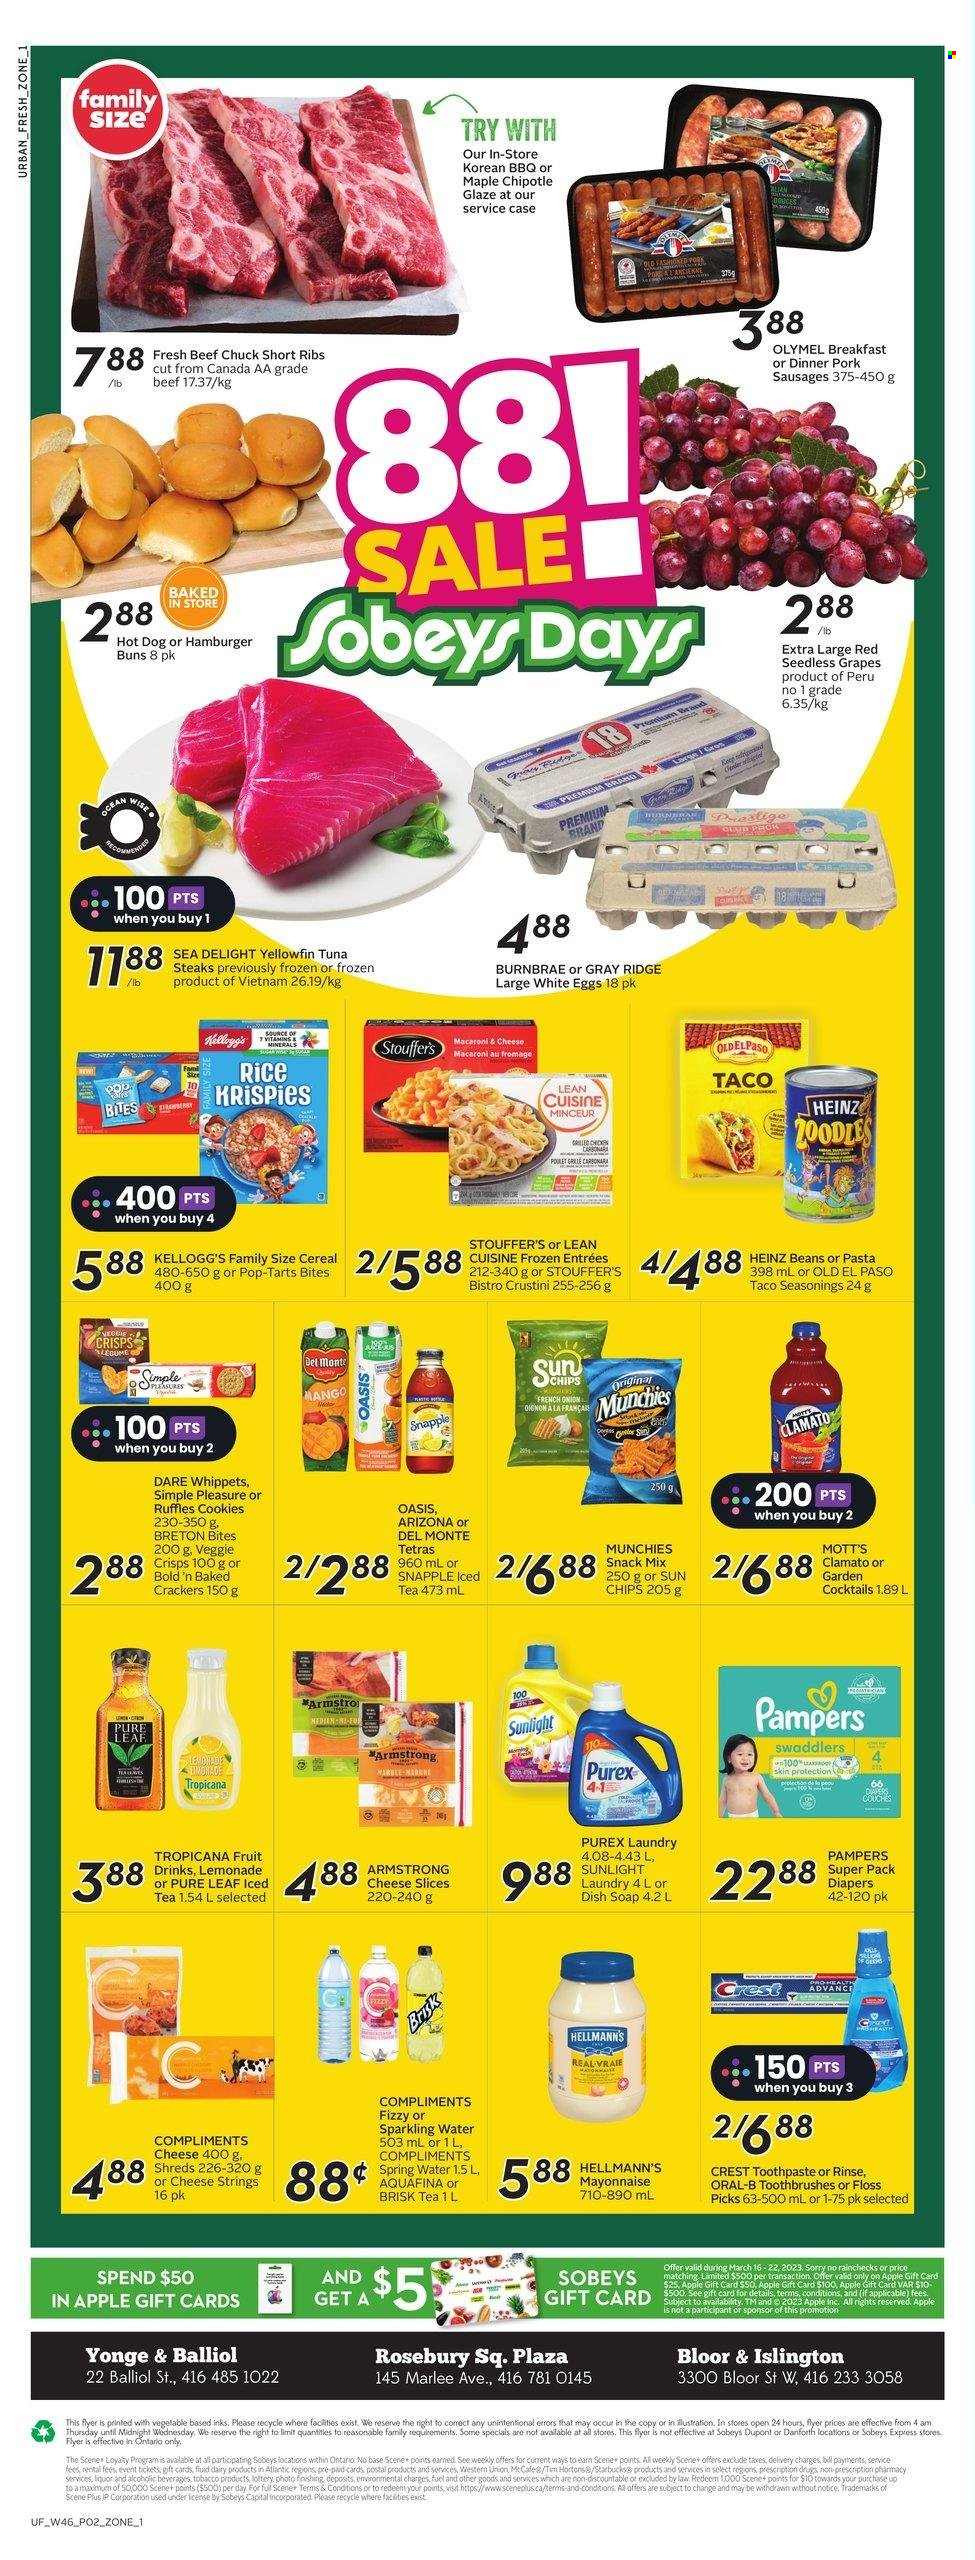 thumbnail - Sobeys Urban Fresh Flyer - March 16, 2023 - March 22, 2023 - Sales products - buns, Old El Paso, burger buns, beans, grapes, mango, seedless grapes, Mott's, tuna, macaroni & cheese, hot dog, Lean Cuisine, sausage, sliced cheese, eggs, mayonnaise, Hellmann’s, Stouffer's, cookies, snack, crackers, Kellogg's, Pop-Tarts, Ruffles, Del Monte, cereals, Rice Krispies, lemonade, ice tea, Clamato, AriZona, Snapple, Aquafina, spring water, sparkling water, water, Pure Leaf, Starbucks, McCafe, liquor, beef ribs, steak, ribs, Pampers, nappies, Sunlight, Purex, soap, toothpaste, Crest, Heinz, Oral-B. Page 2.